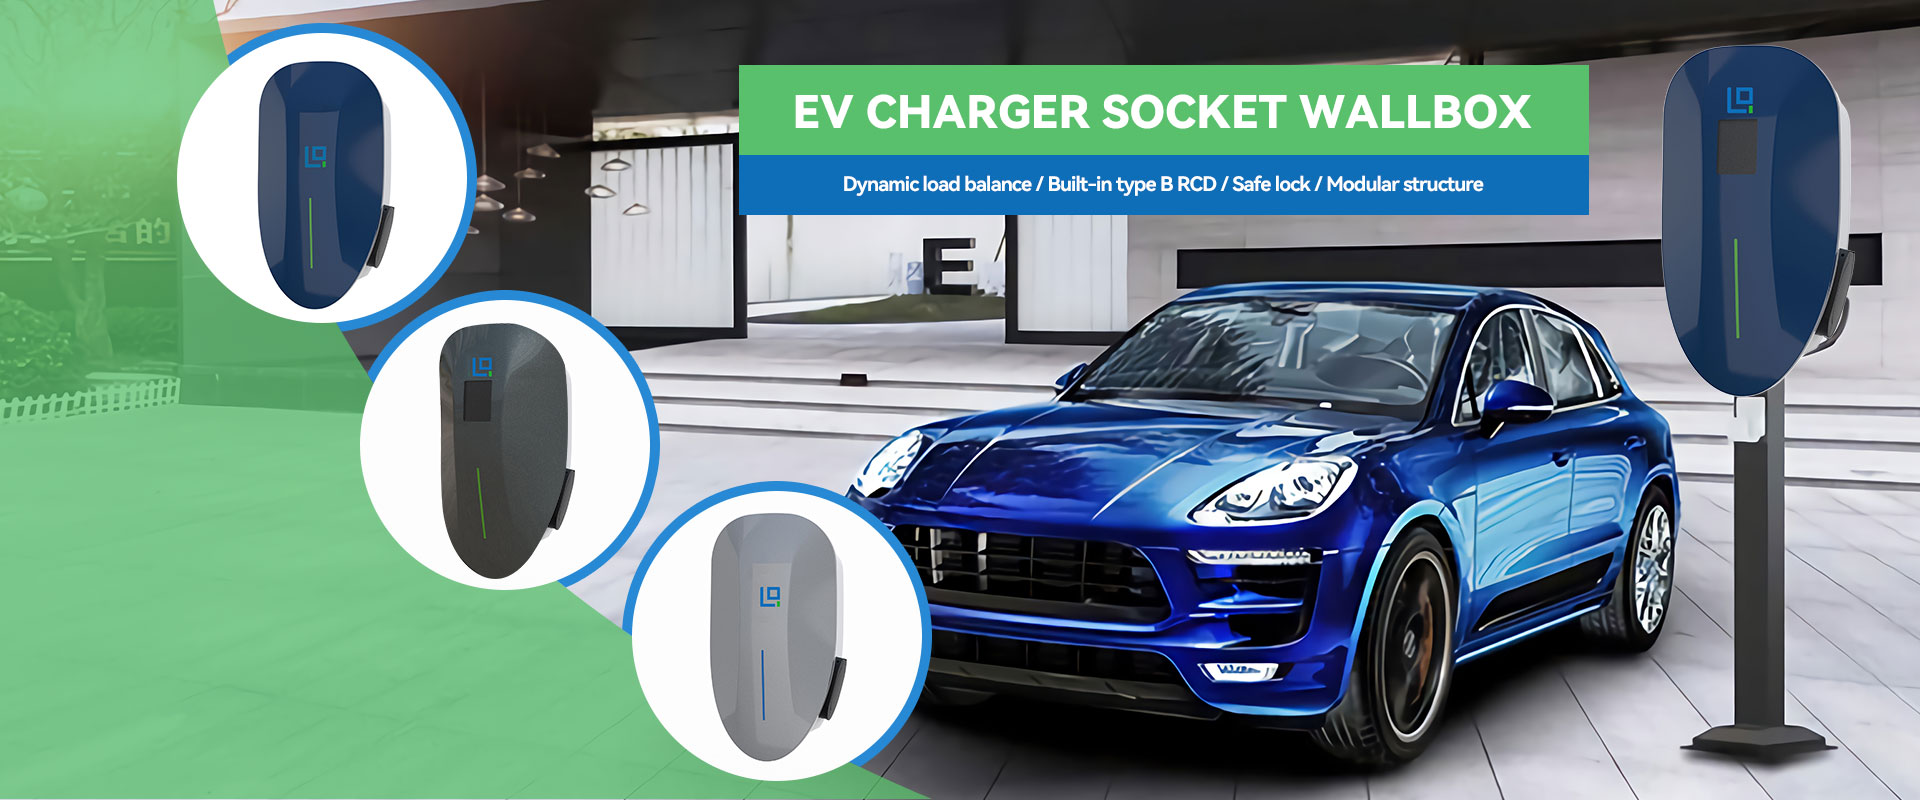 EV Charger Tethered Wallbox Suppliers